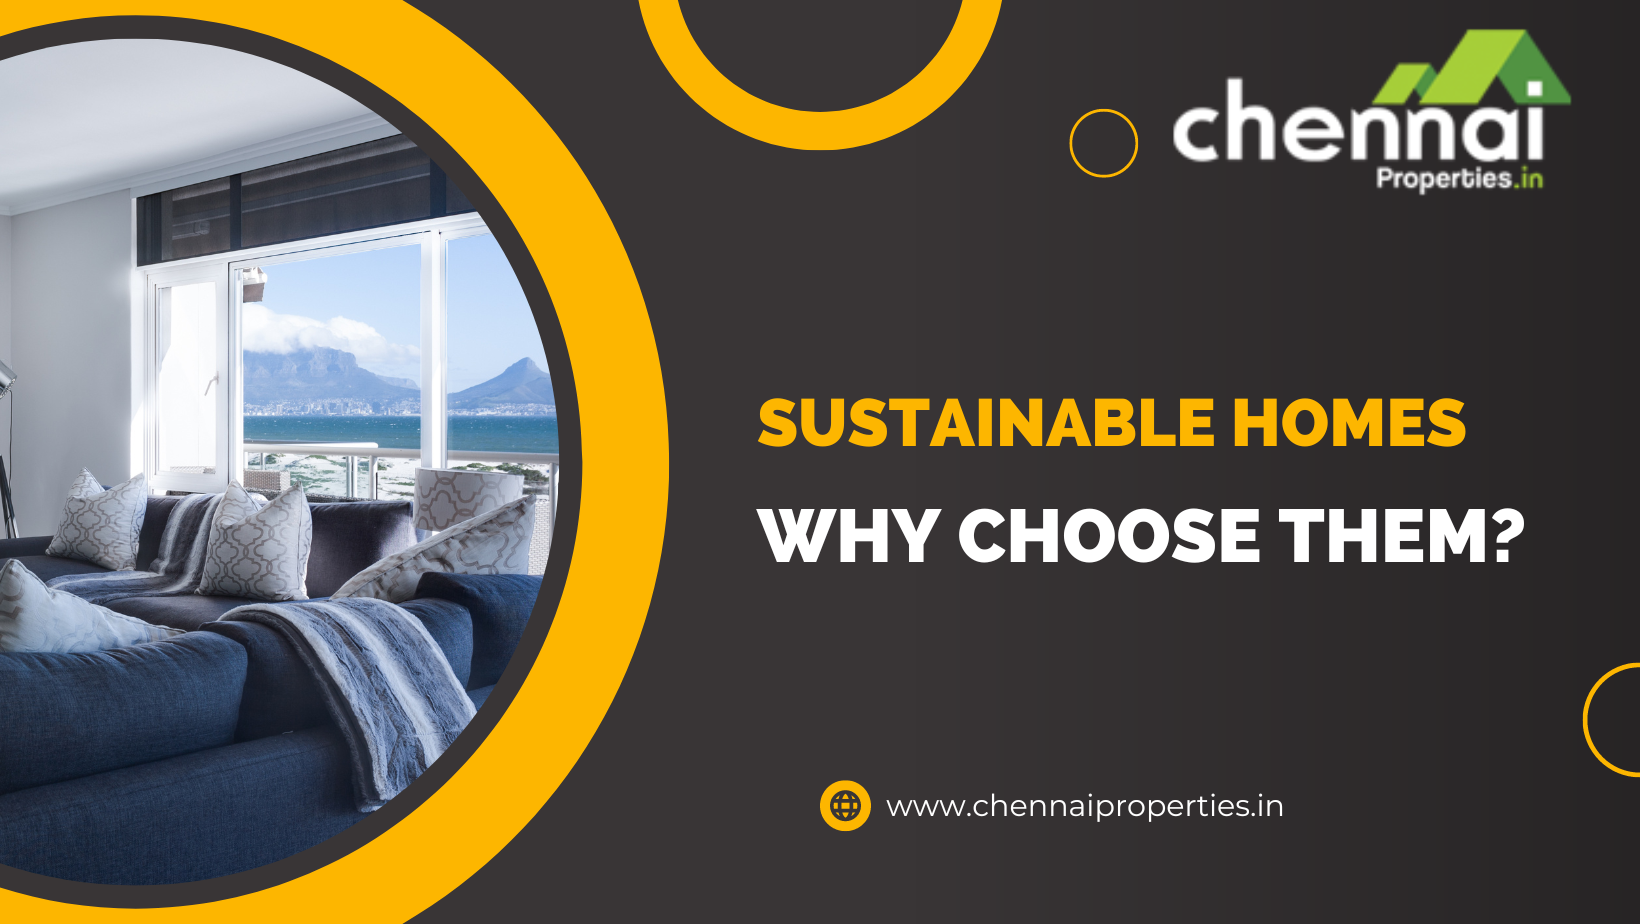 Sustainable Homes - Why Choose Them?